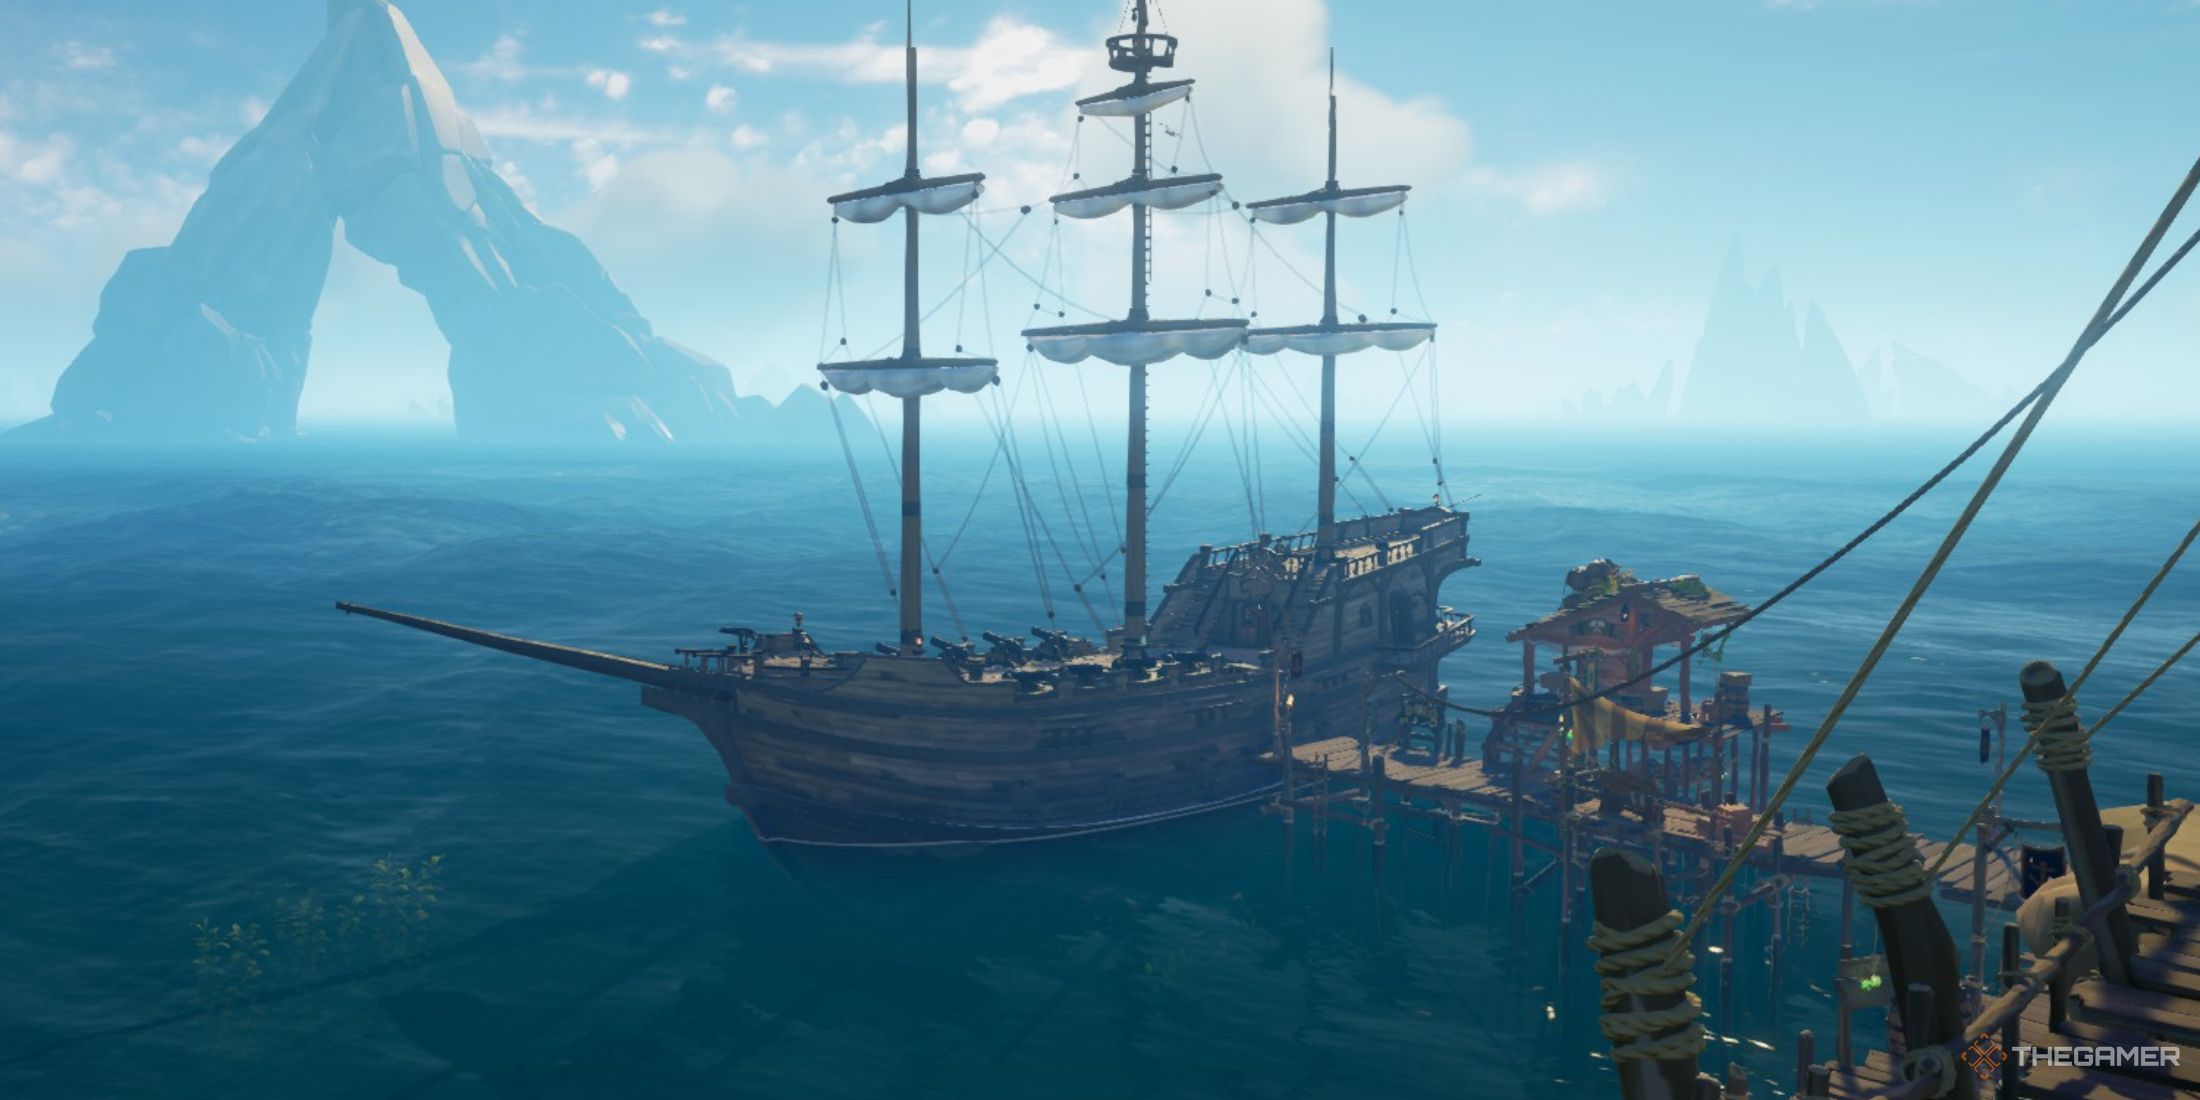 A screenshot from Sea of Thieves showing the Galleon ship docked with its sails raised.